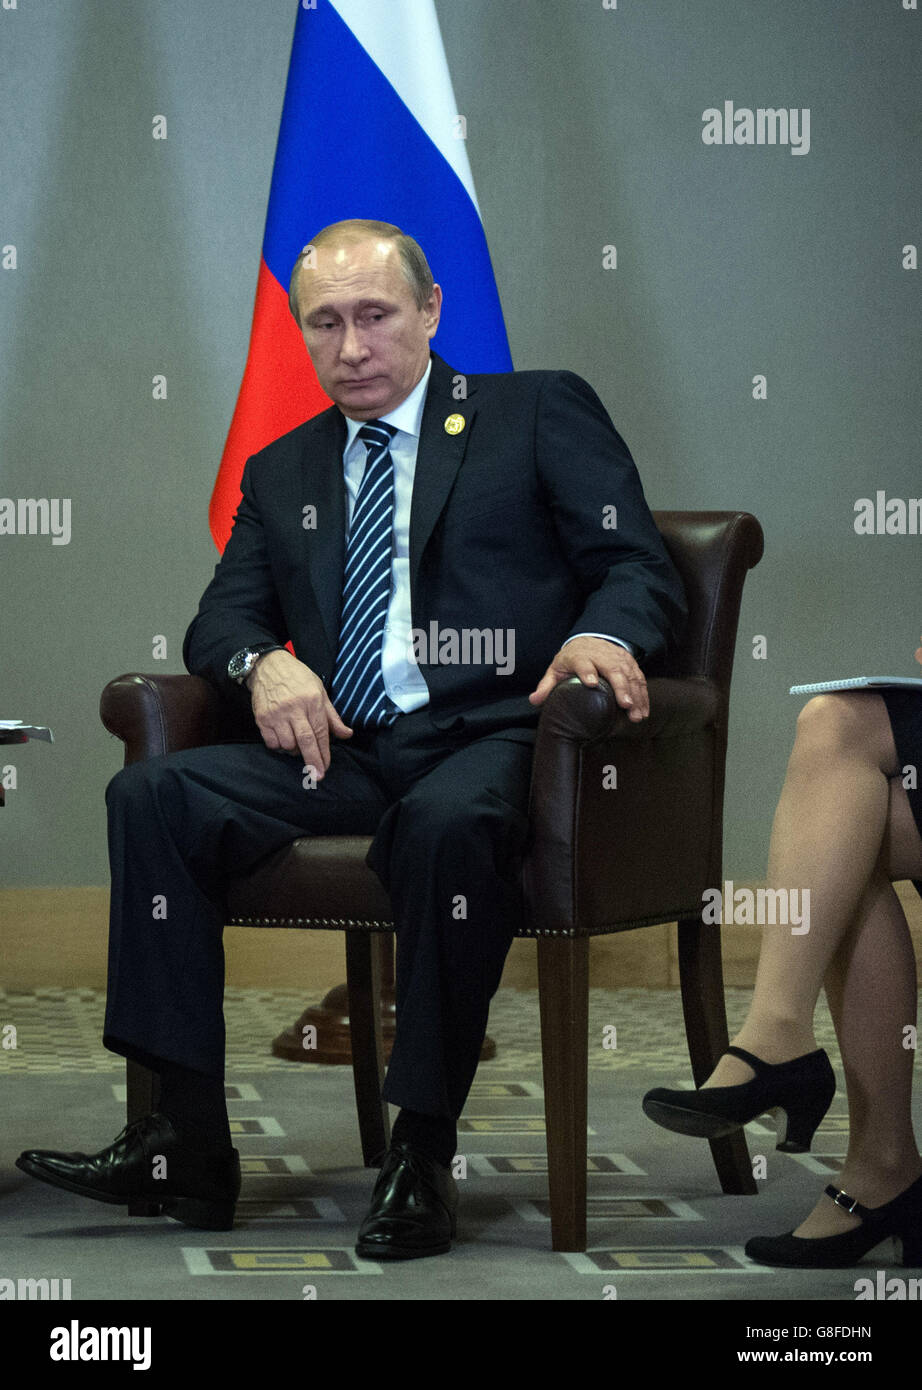 Russian President Vladimir Putin during a meeting with Prime Minister David Cameron at the G20 Turkey Leaders Summit in Antalya, Turkey. Stock Photo